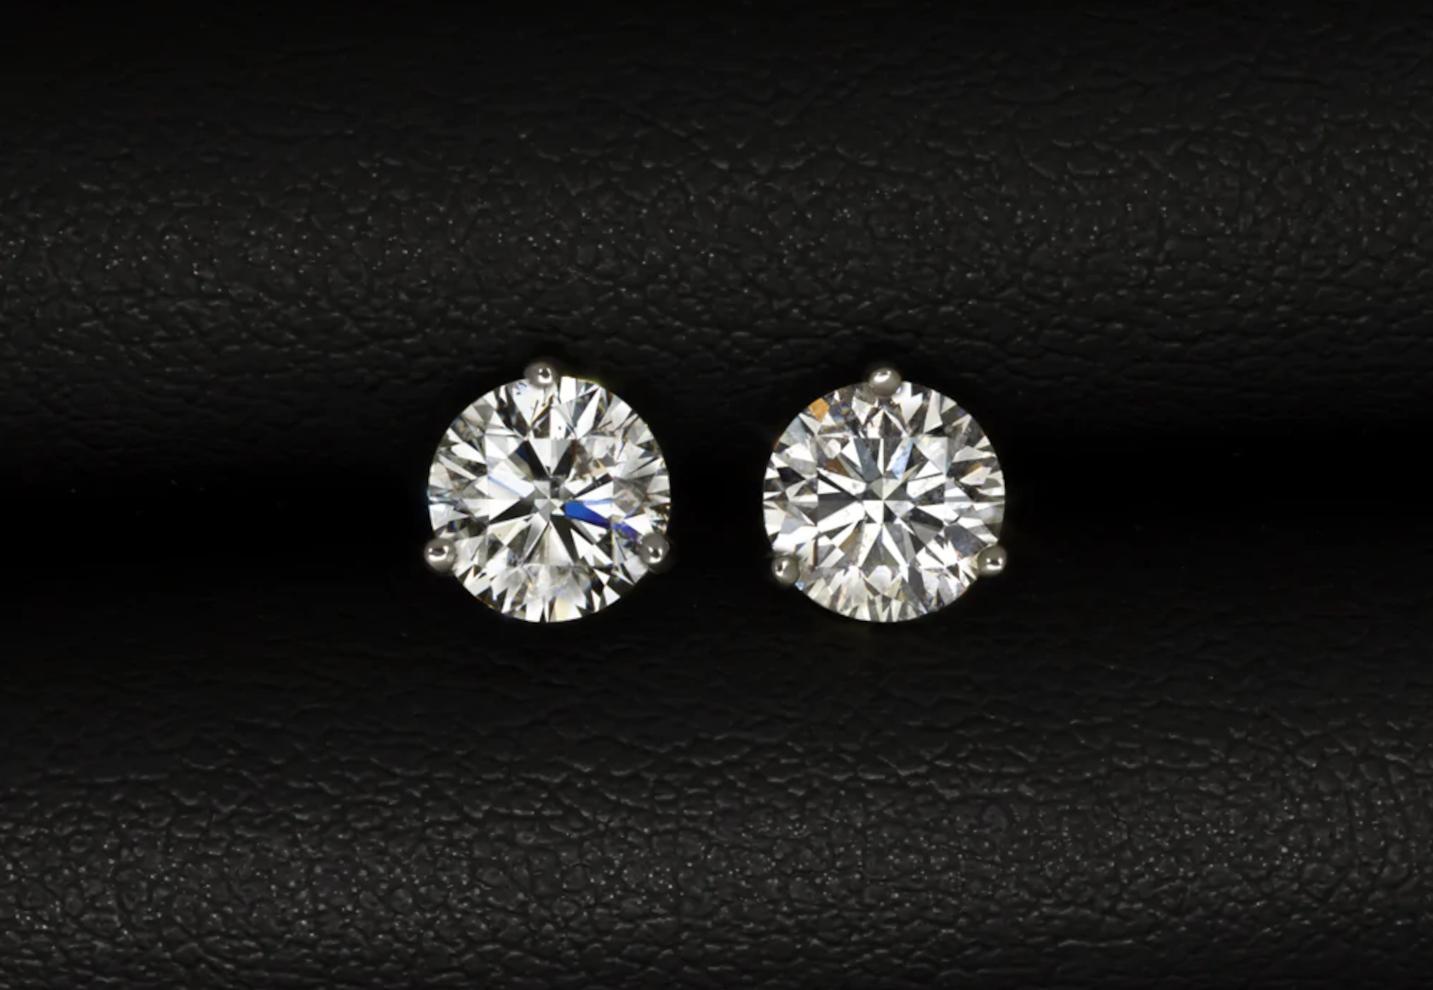 This pair of 1.90 carat round brilliant cut diamond ear studs are very well cut, eye clean when worn and a strikingly brilliant white color.
 
They are 100% natural diamonds and have not received any treatment or enhancement of any kind.
They are